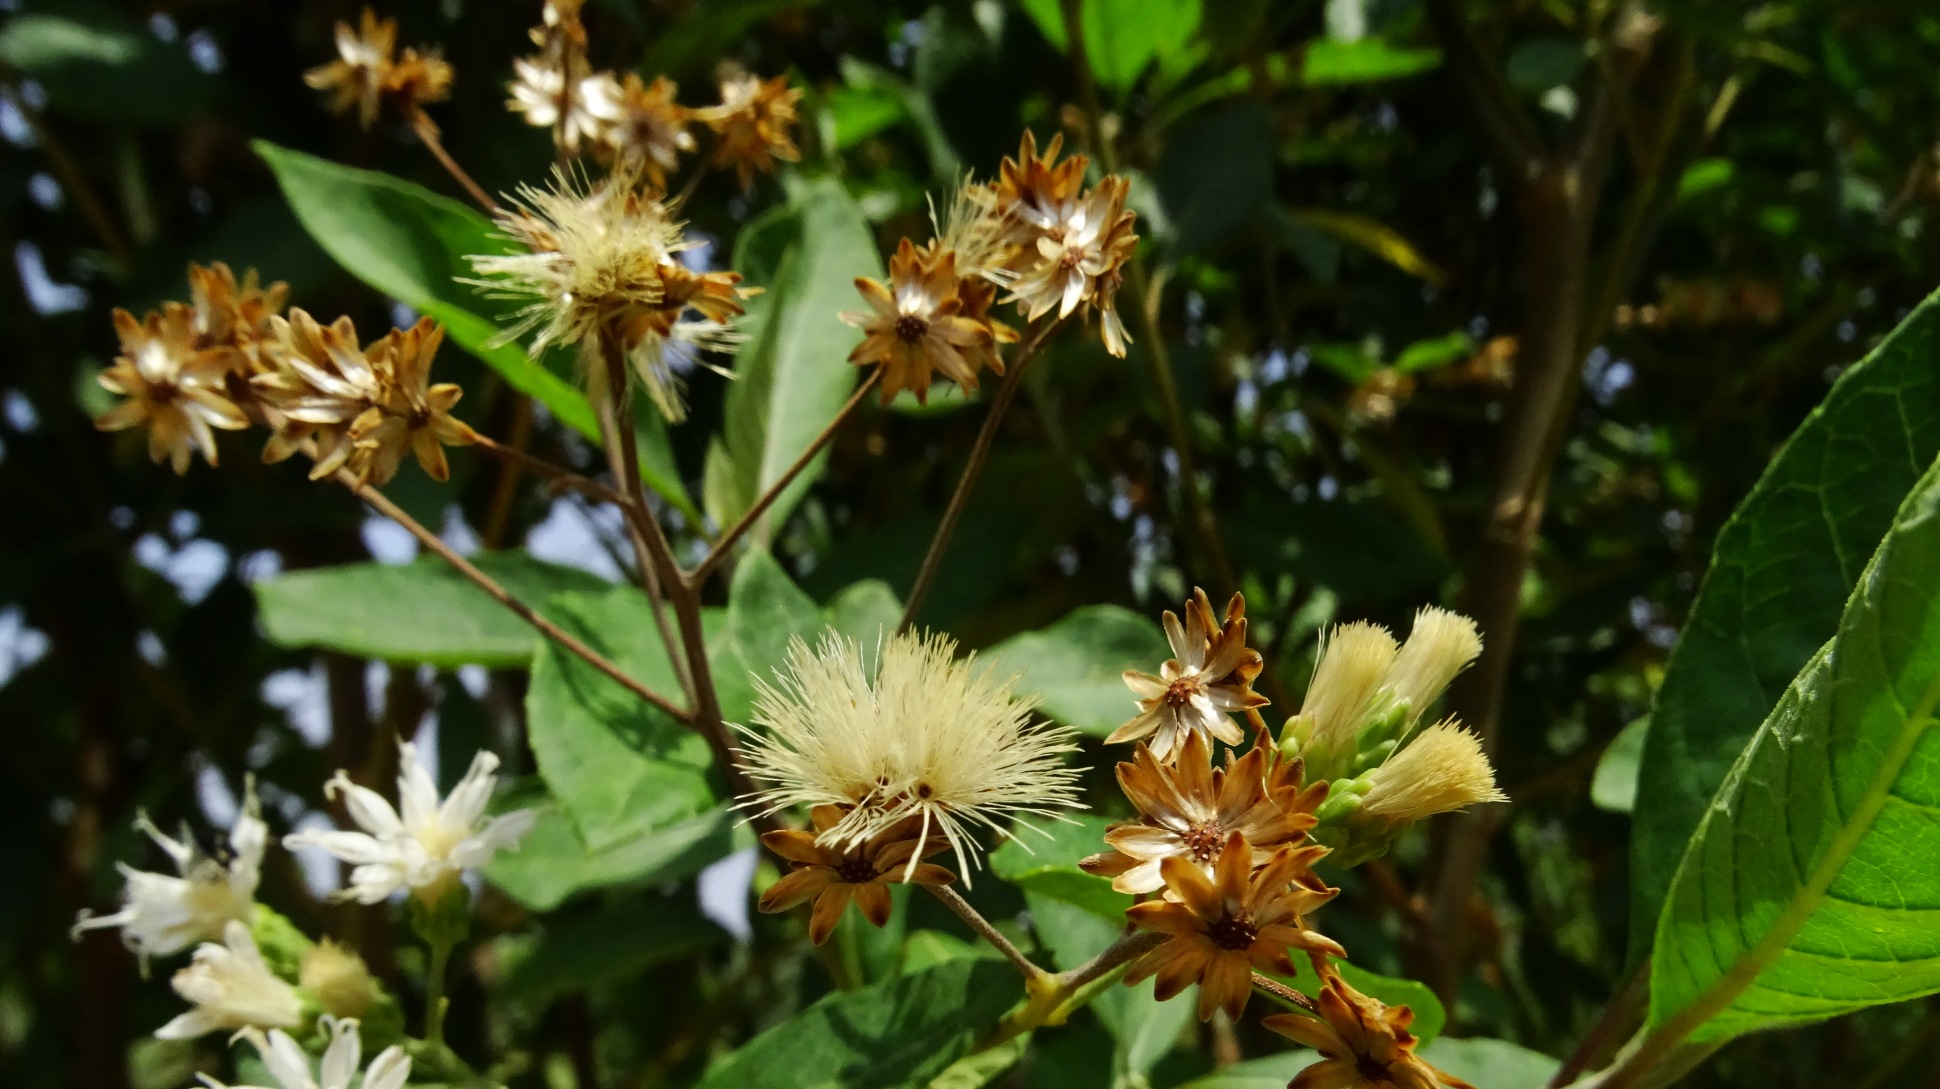 A tree with green leaves and feather golden flowers